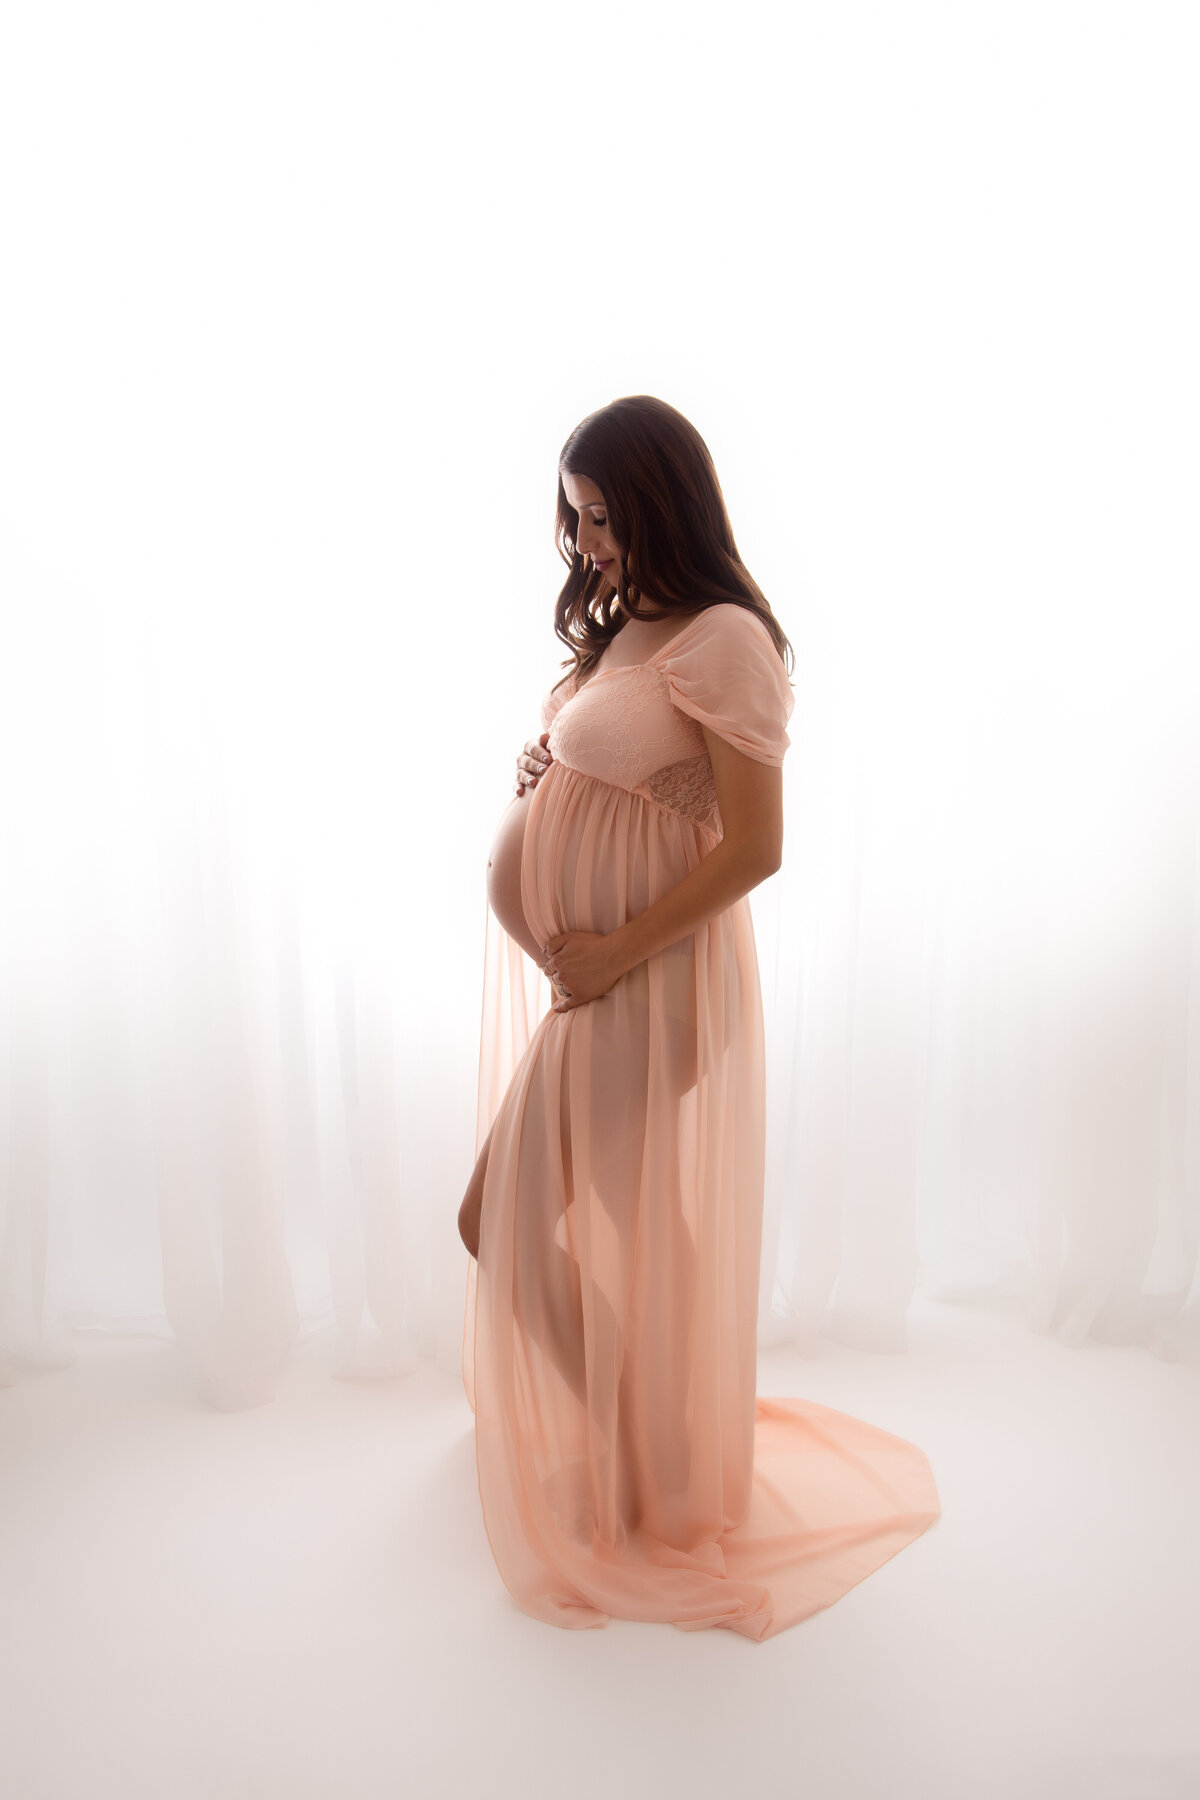 Pregnant mother in a peach dress